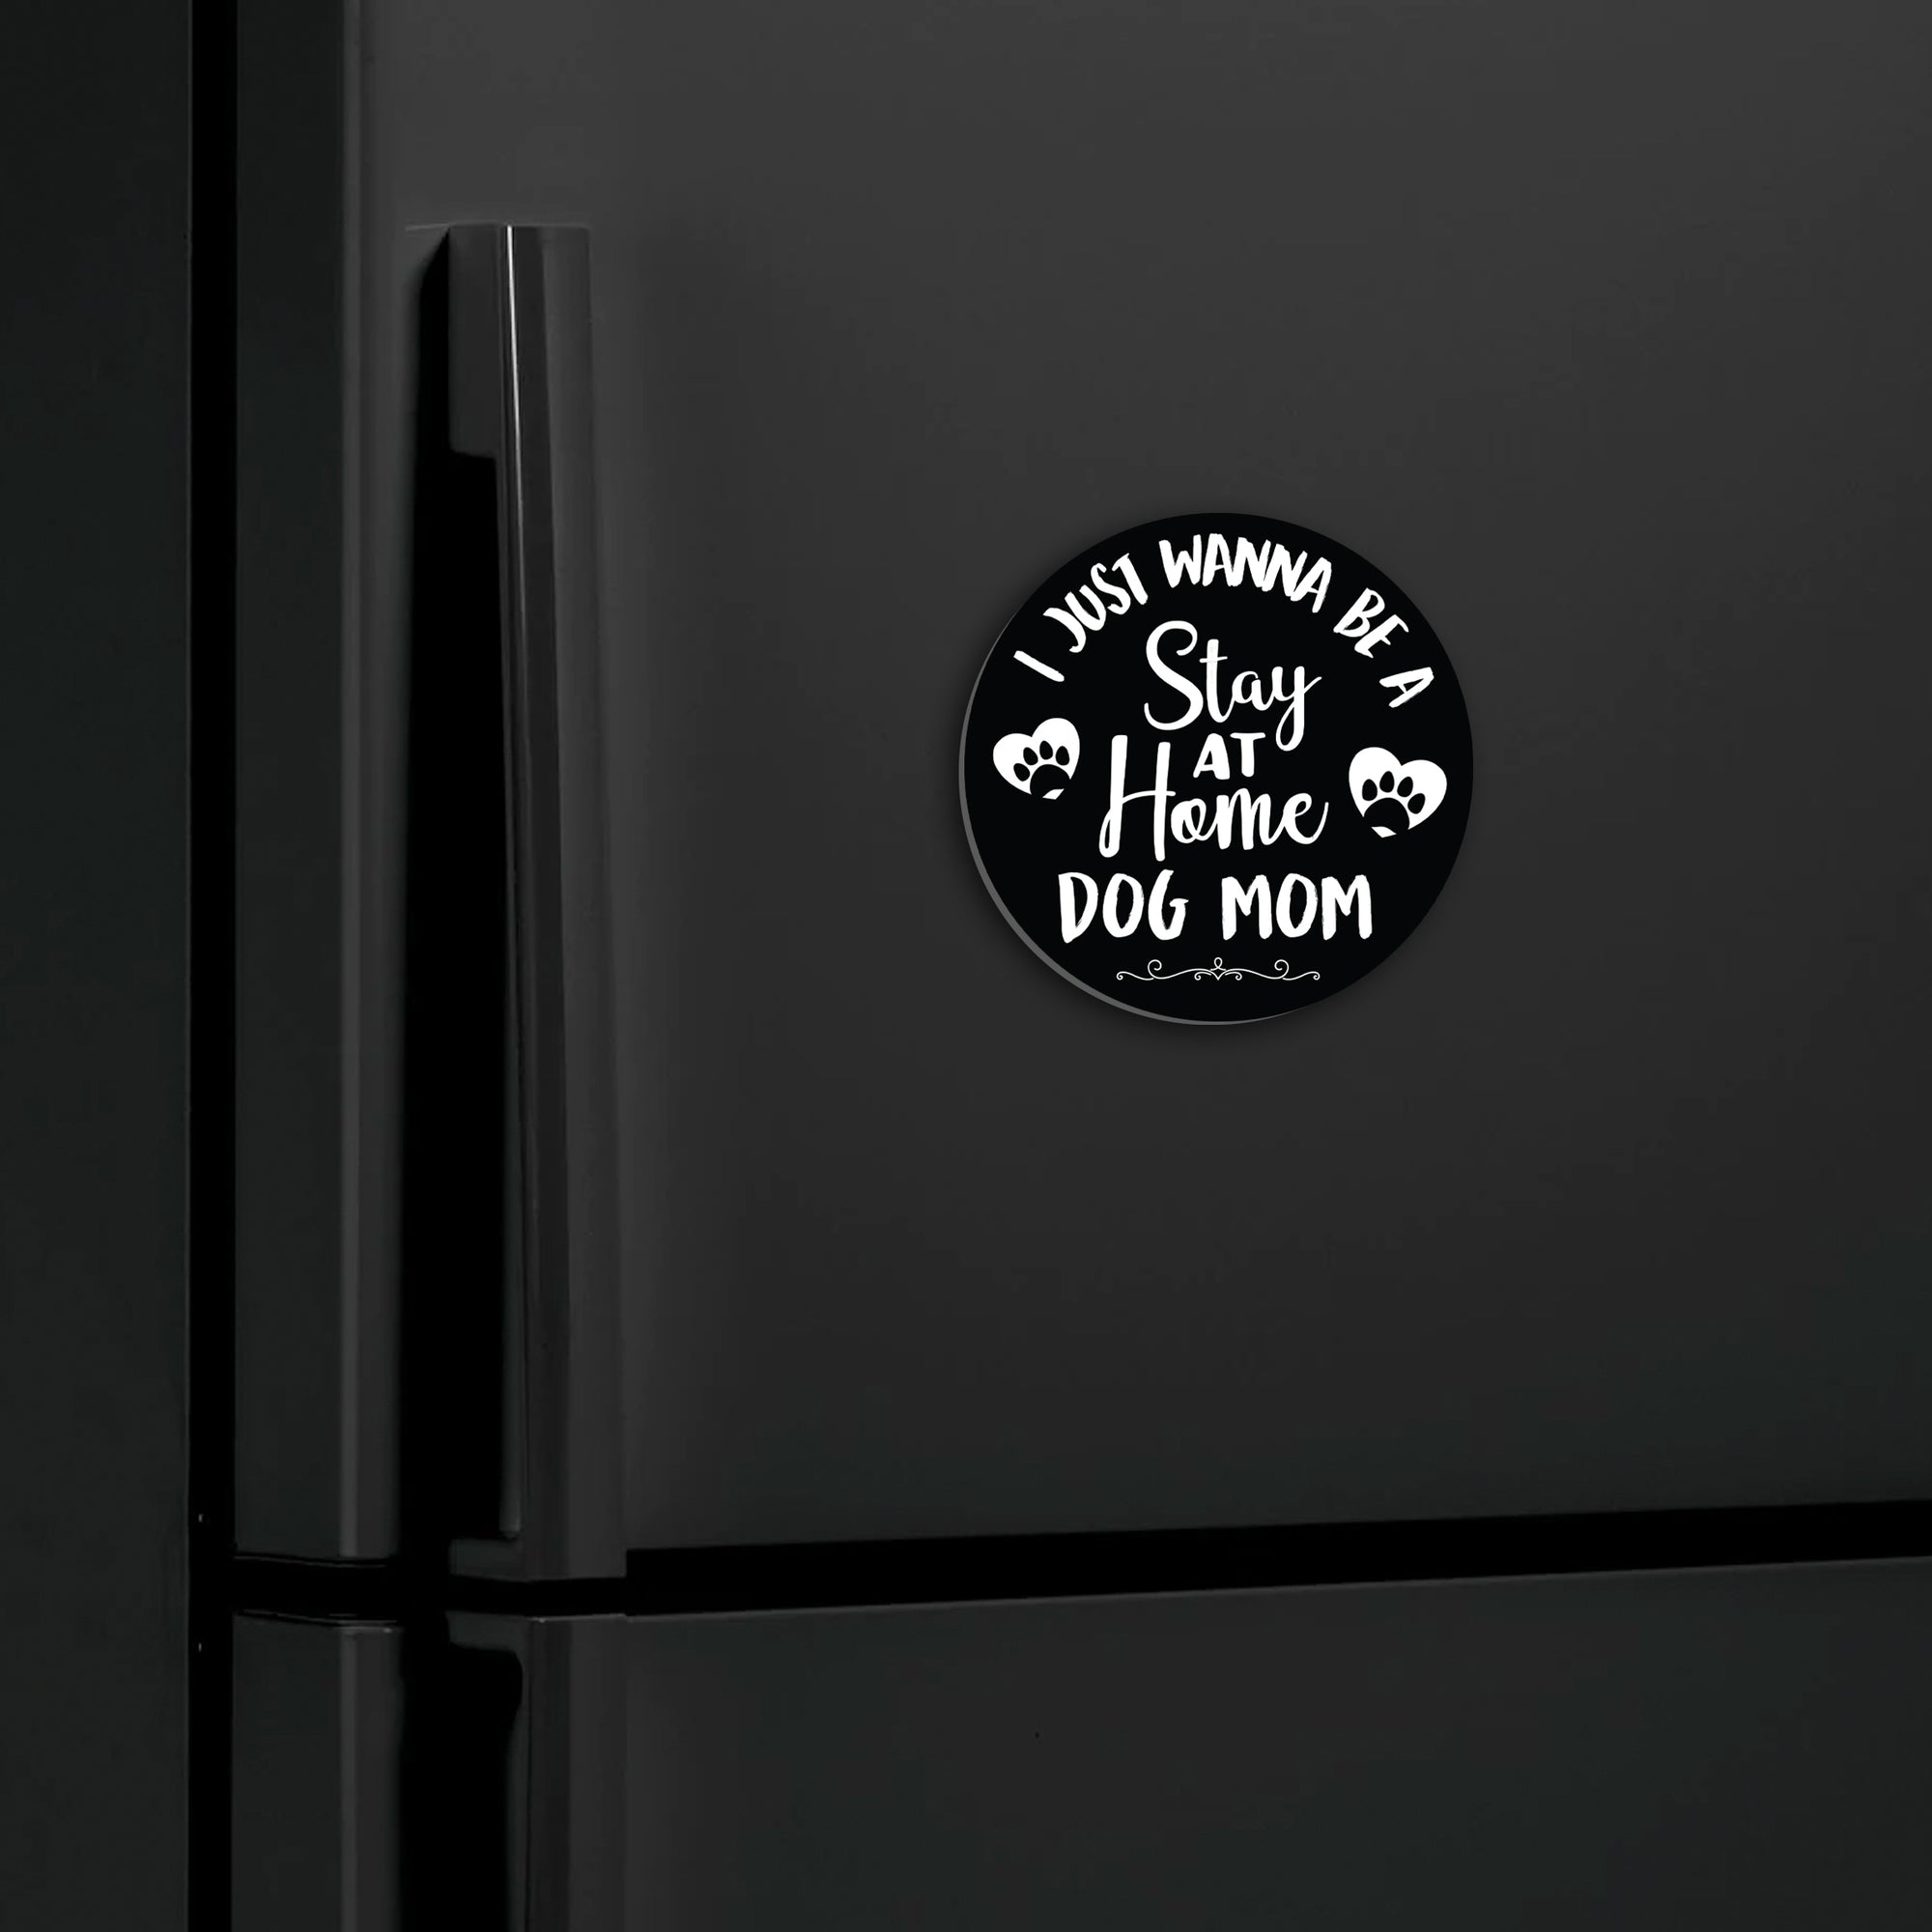 Refrigerator Magnet Perfect Gift Idea For Pet Owners - Stay At Home